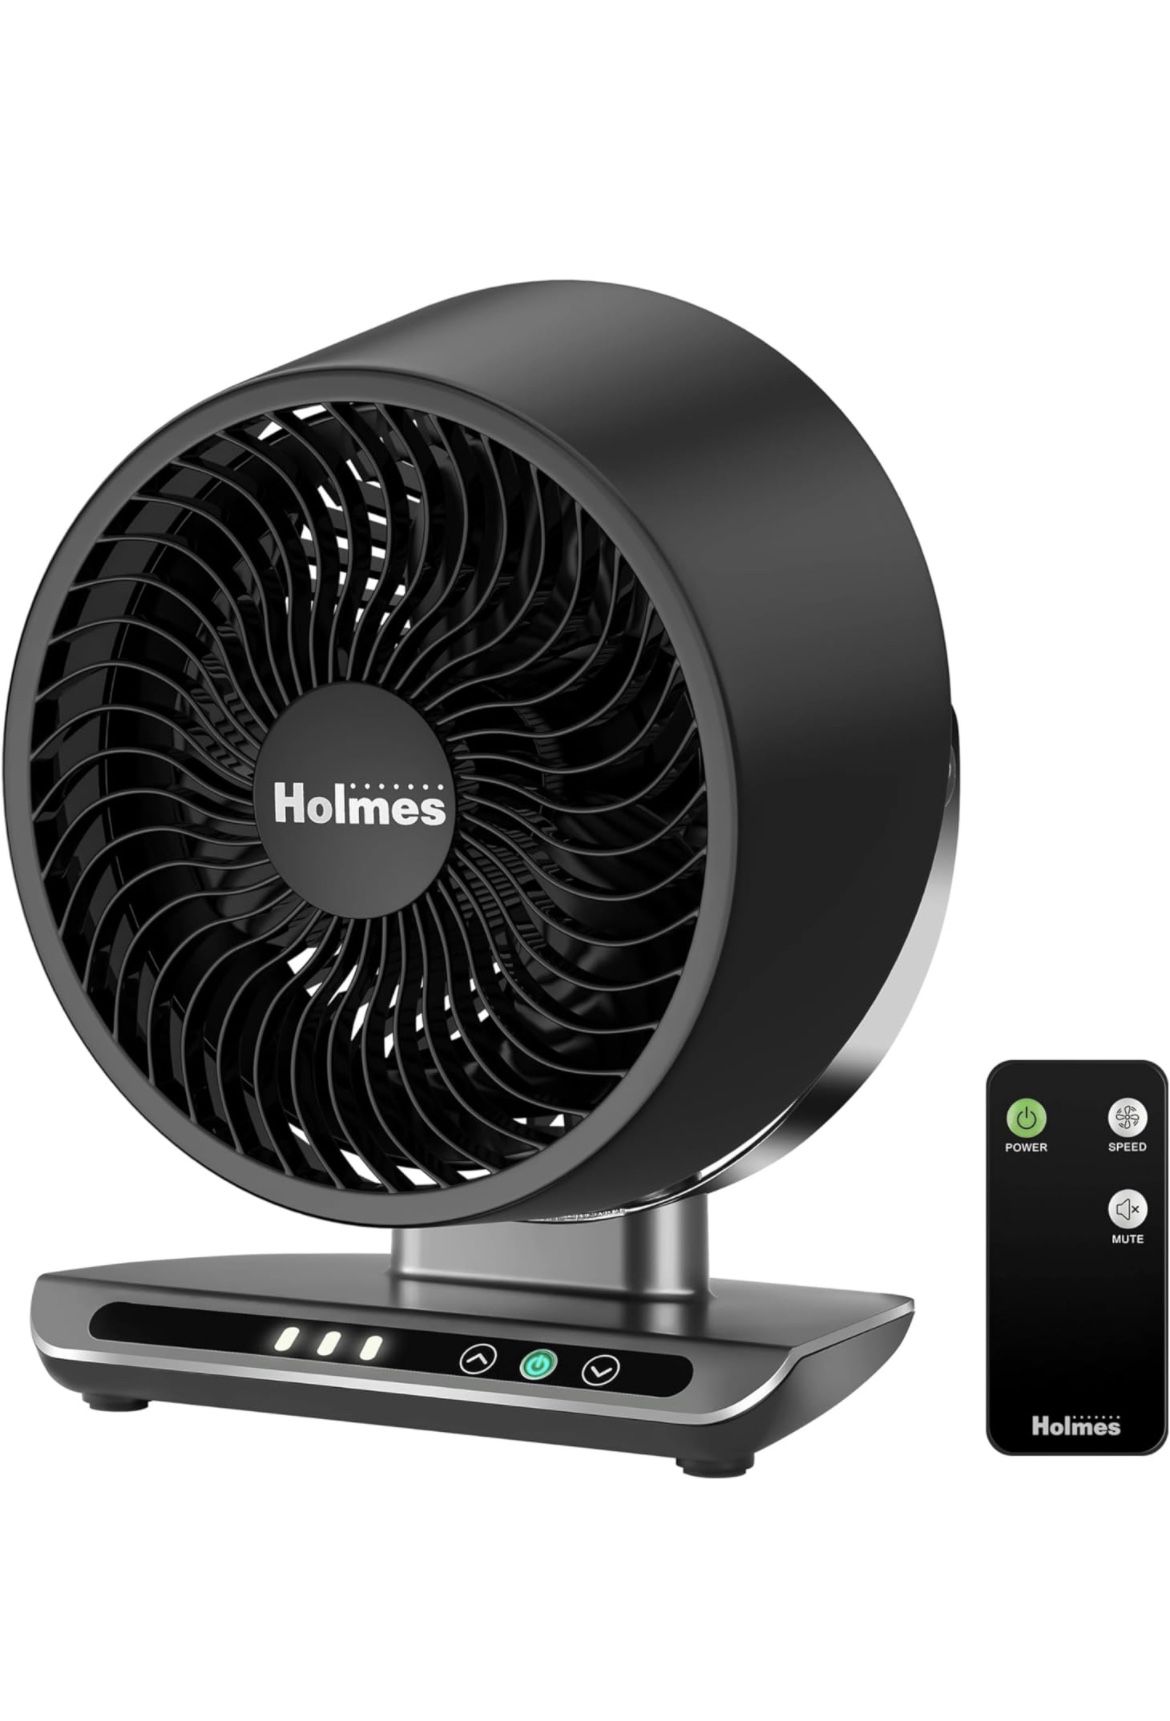 HOLMES Blizzard 8" Air Circulator Digital Fan, 3 Speeds, 90° Adjustable Head Tilt, Capacitive Touch, Remote Control, Ideal for Home, Bedroom, Kitchen 